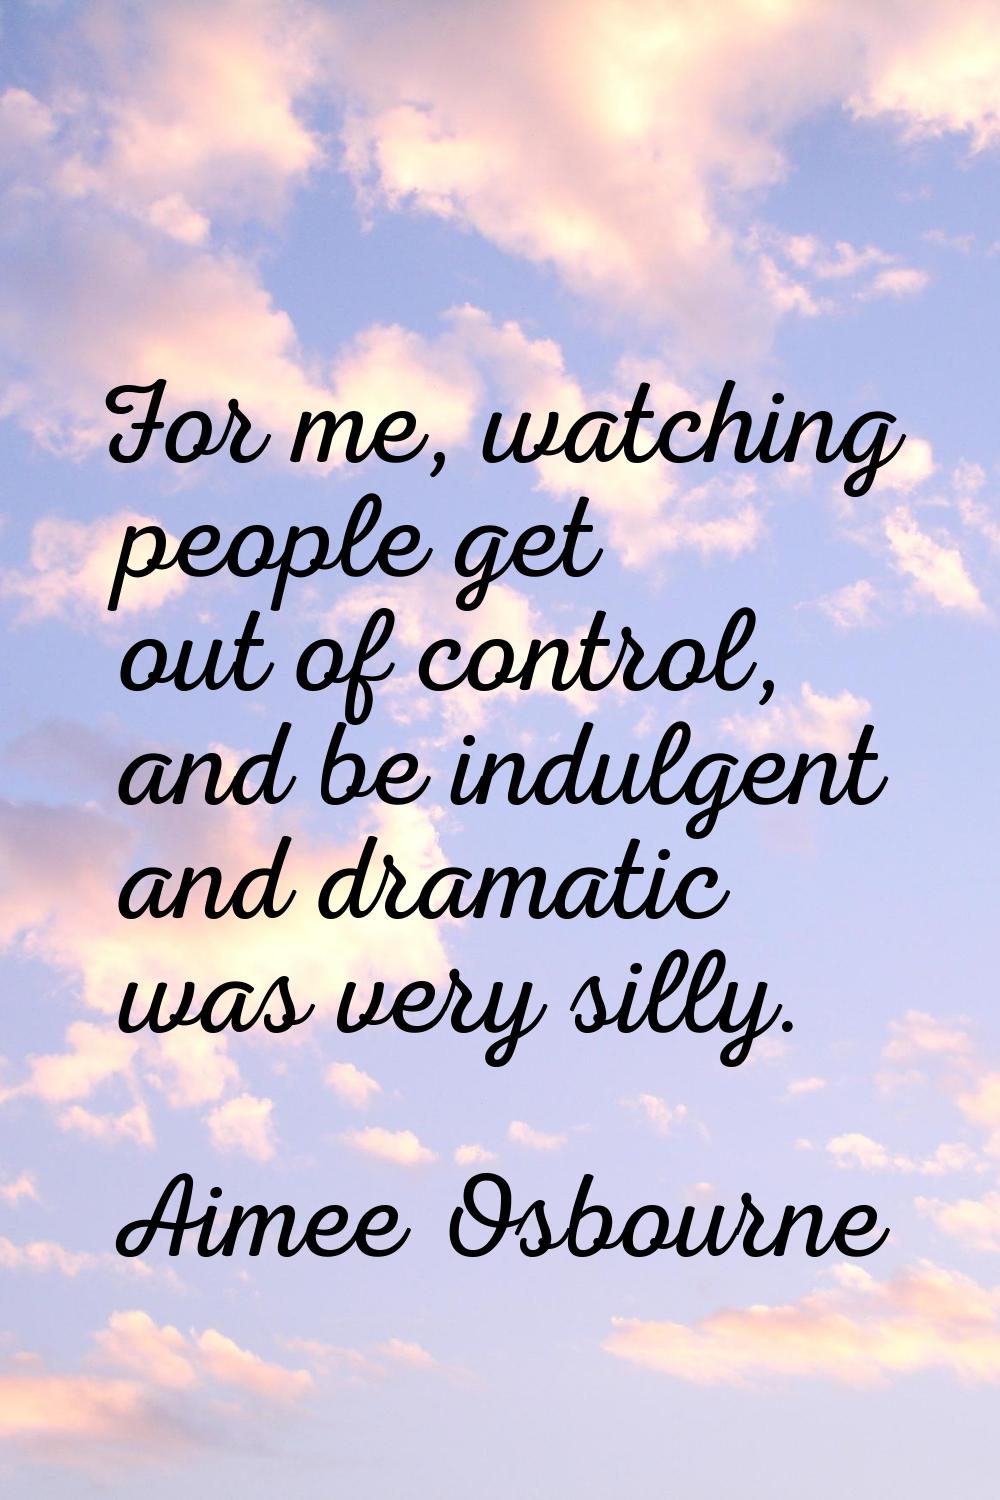 For me, watching people get out of control, and be indulgent and dramatic was very silly.